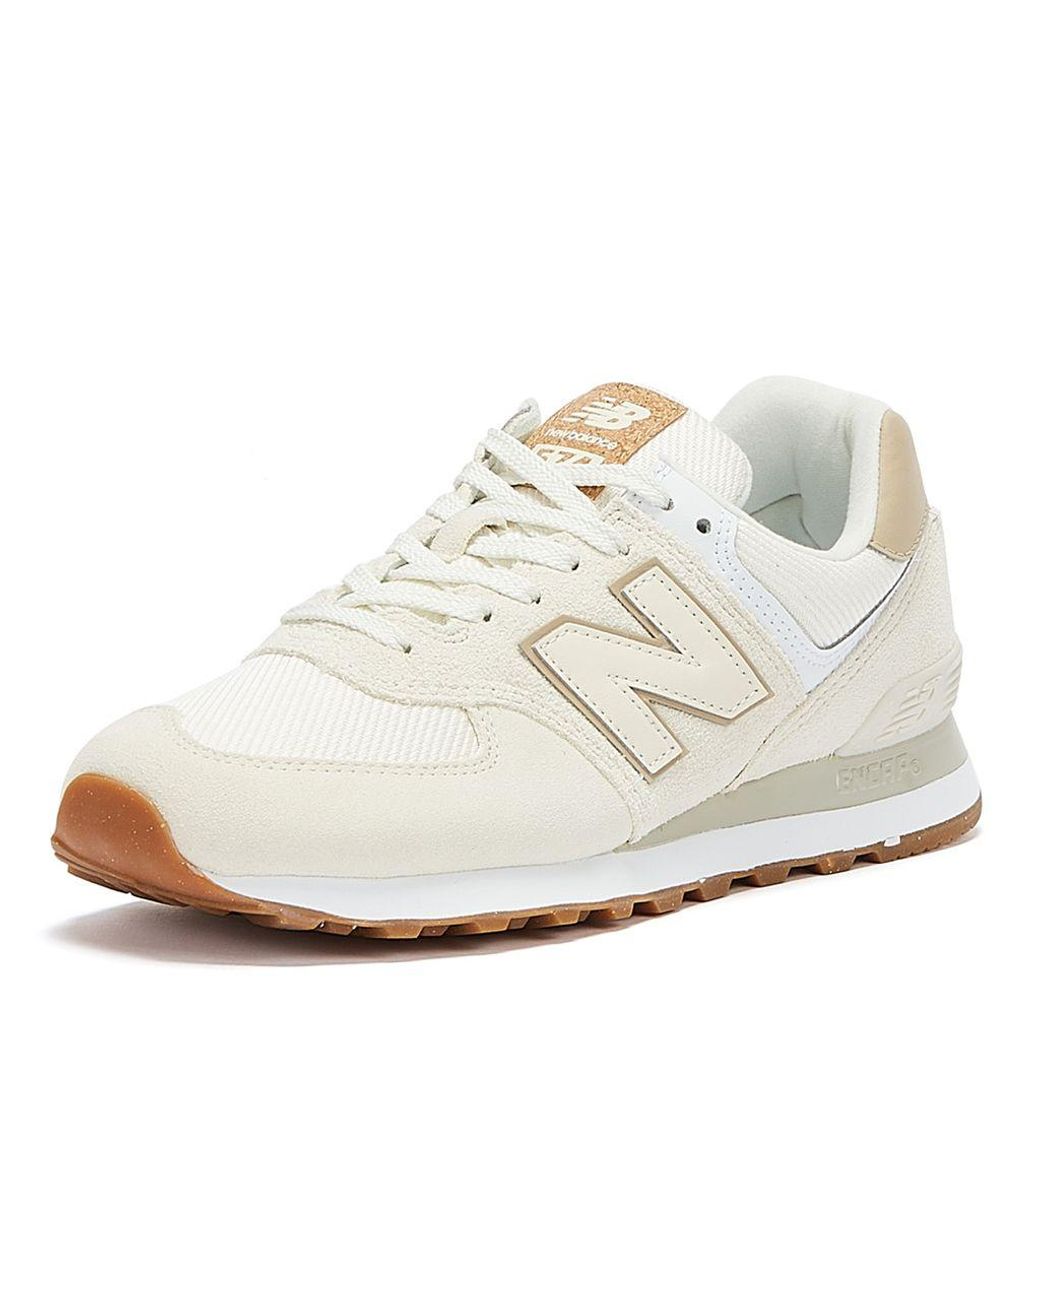 New Balance 574 / Tan Trainers in White | Lyst